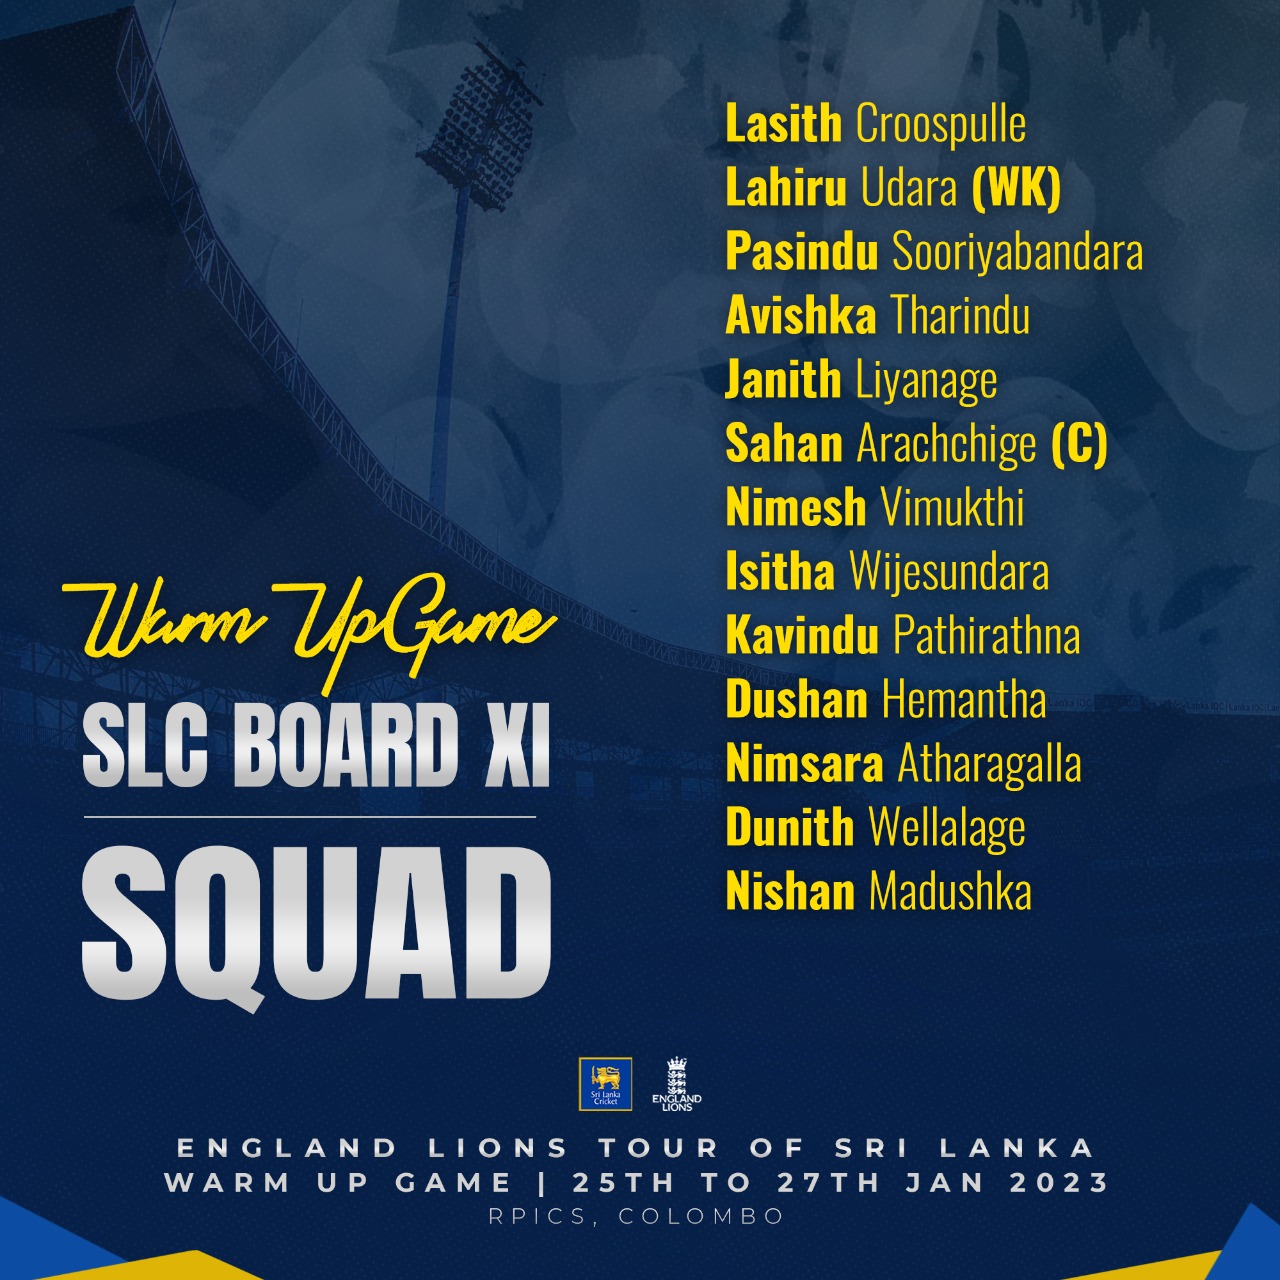 SLC Board XI squad for 3-day warm-up game against England Lions